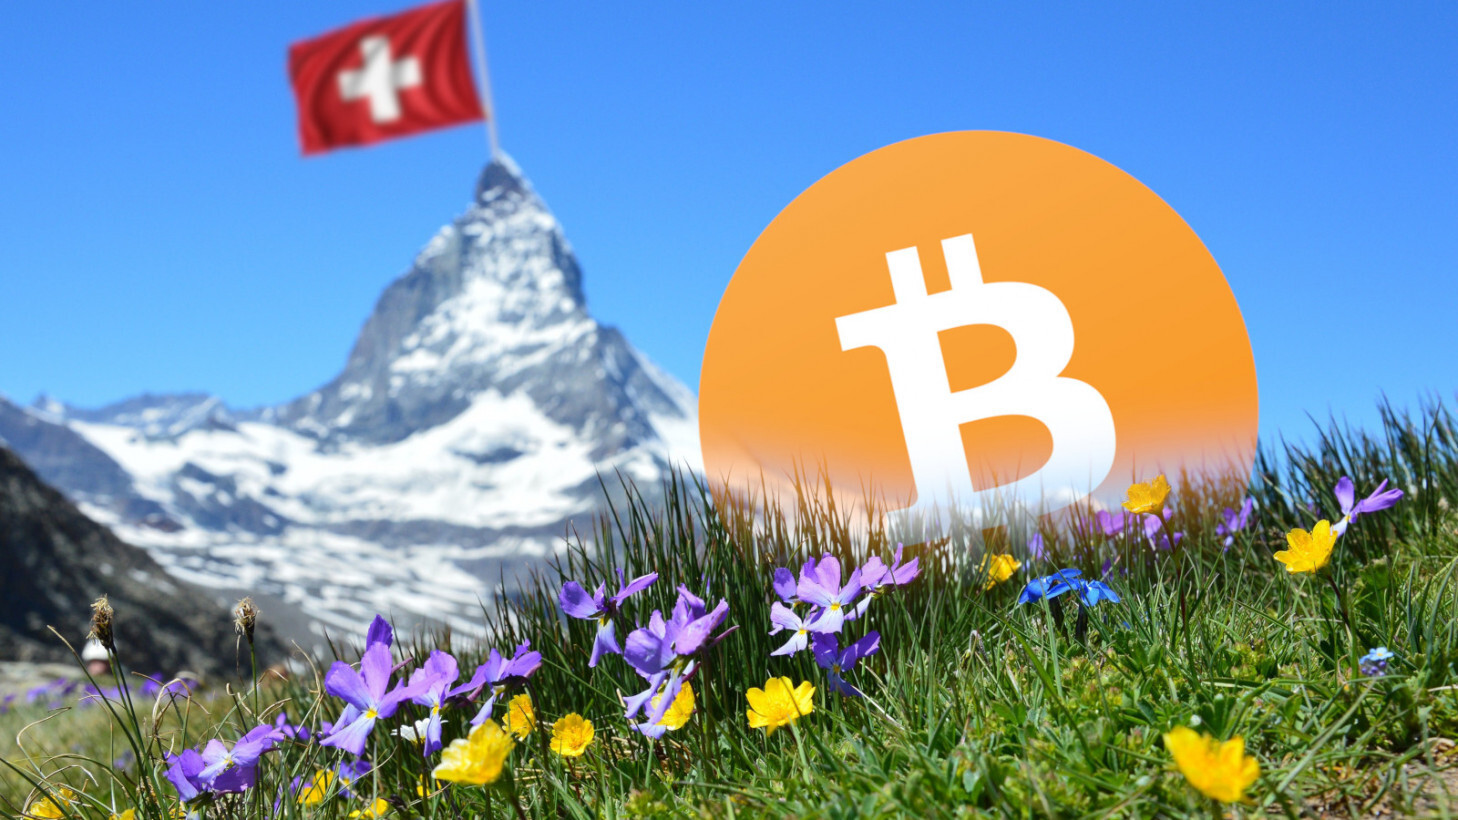 Switzerland gets another ‘Bitcoin bank’ that holds cryptocurrency for customers